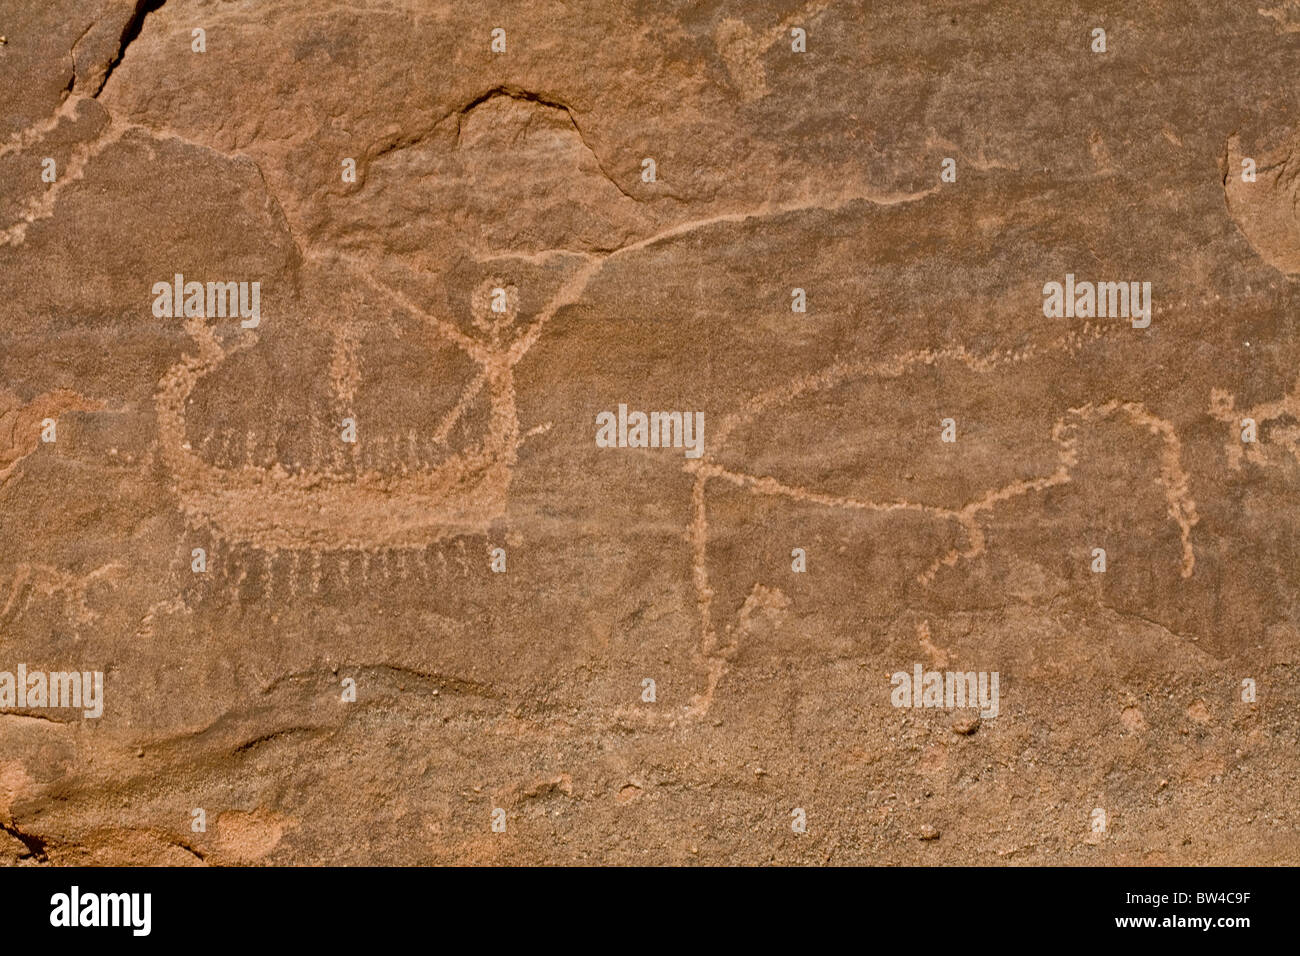 Close up of Boat with crew at Hans Winkler's famous recorded Rock-Art site 26 in Wadi Abu Wasil in the Eastern Desert of Egypt. Stock Photo